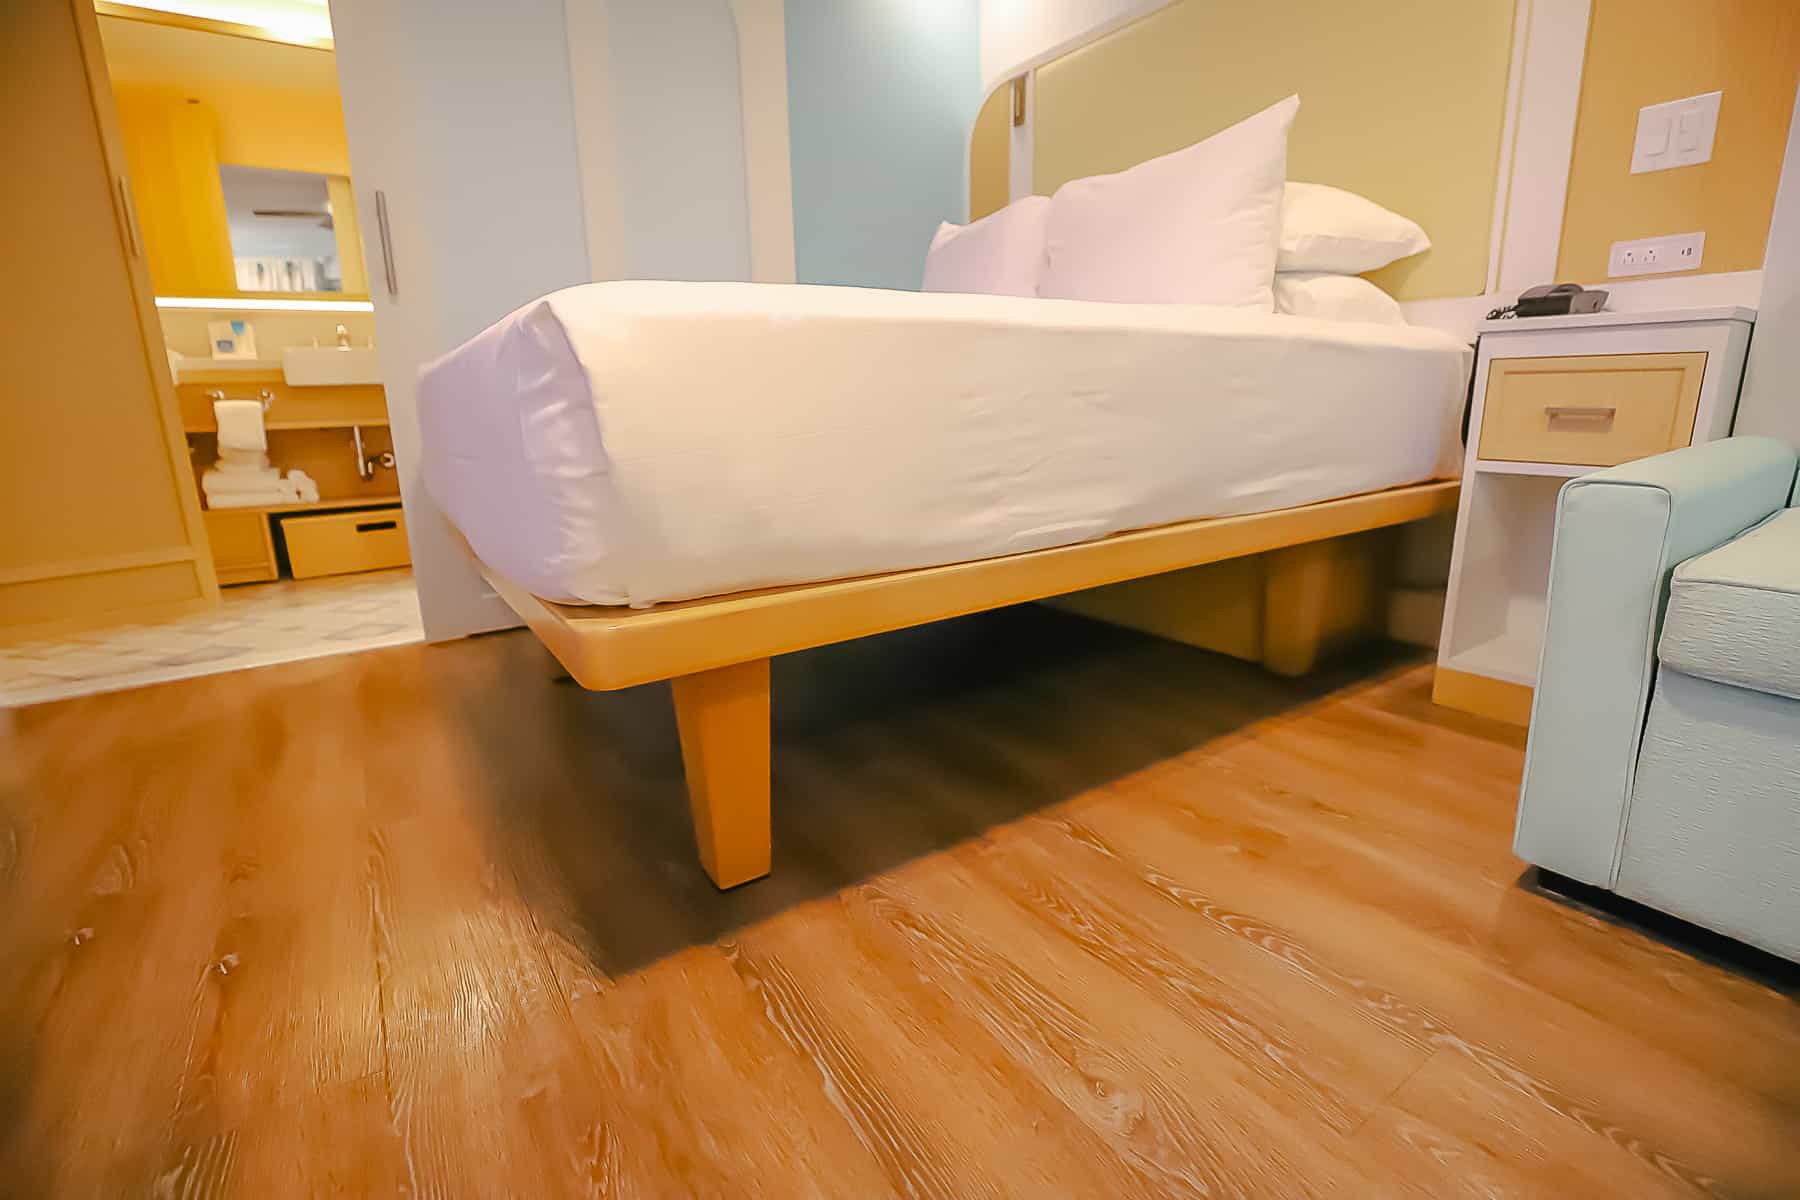 shows how you can store luggage underneath the platform bed in room